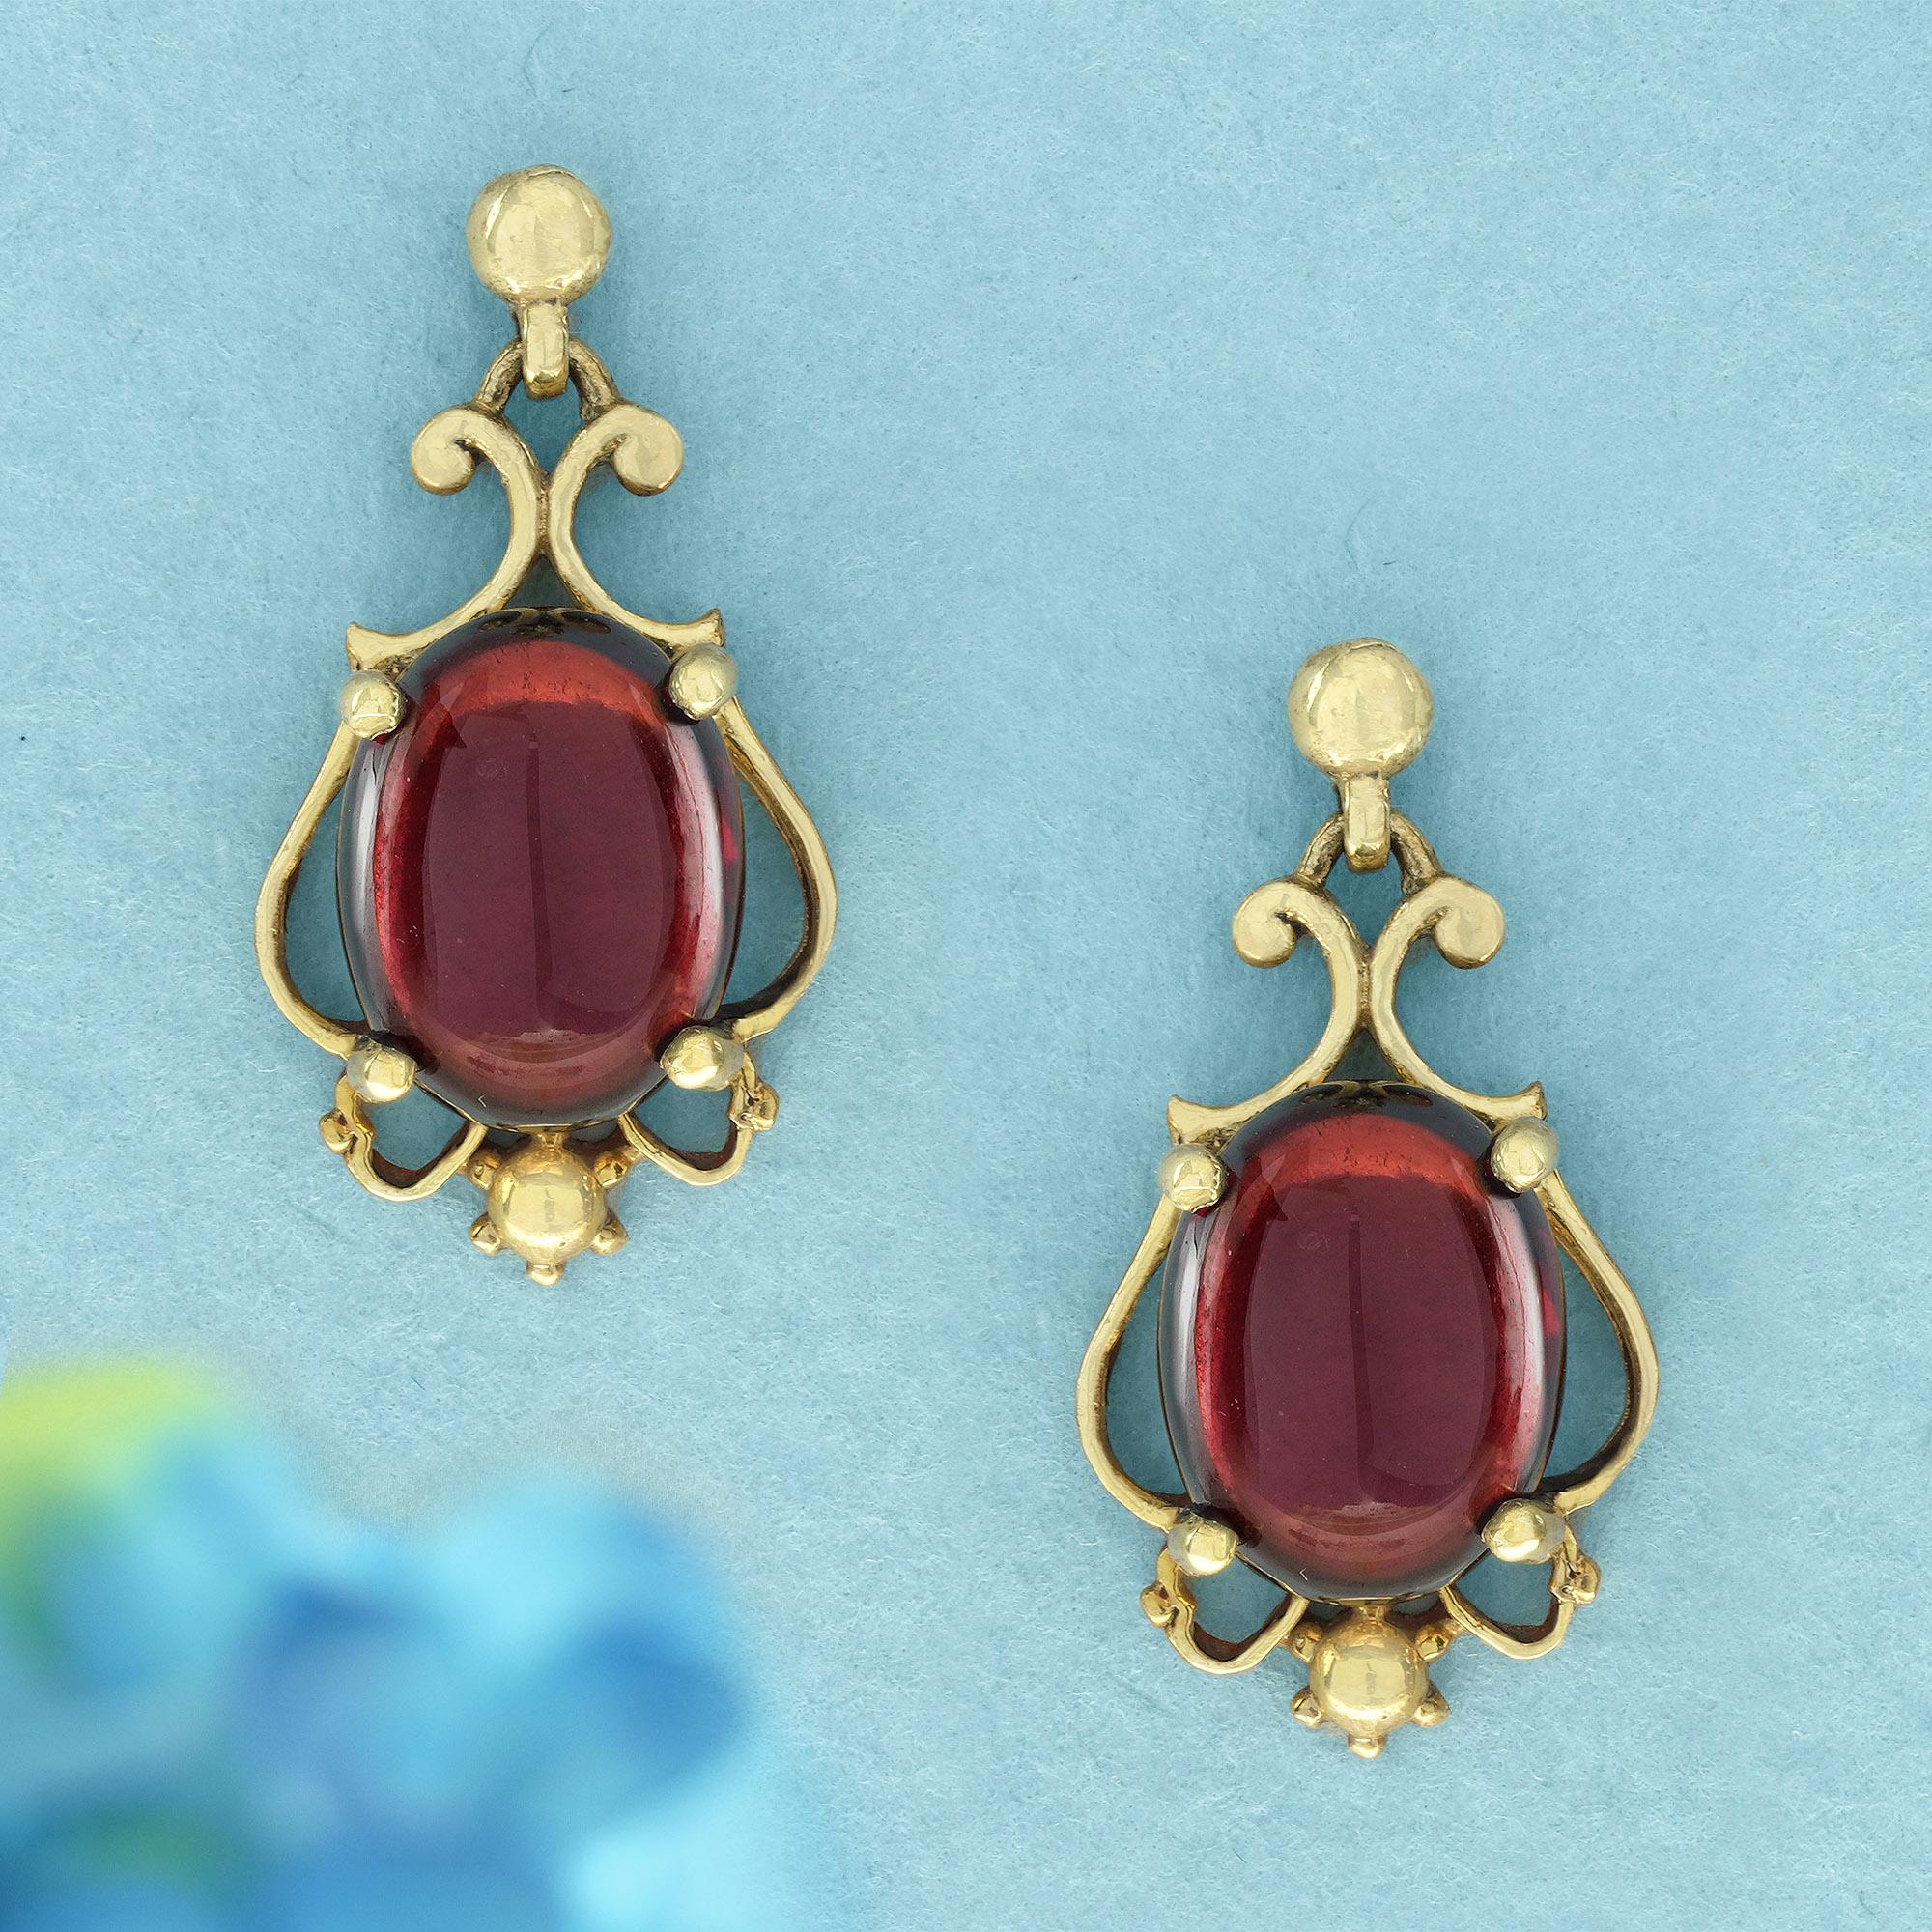 Indulge in timeless elegance with these vintage-inspired garnet earrings. Each earring features a captivating round, cabochon-cut garnet, its deep red color catching the light with a smooth, polished brilliance.  Set in a beautiful scrollwork gold